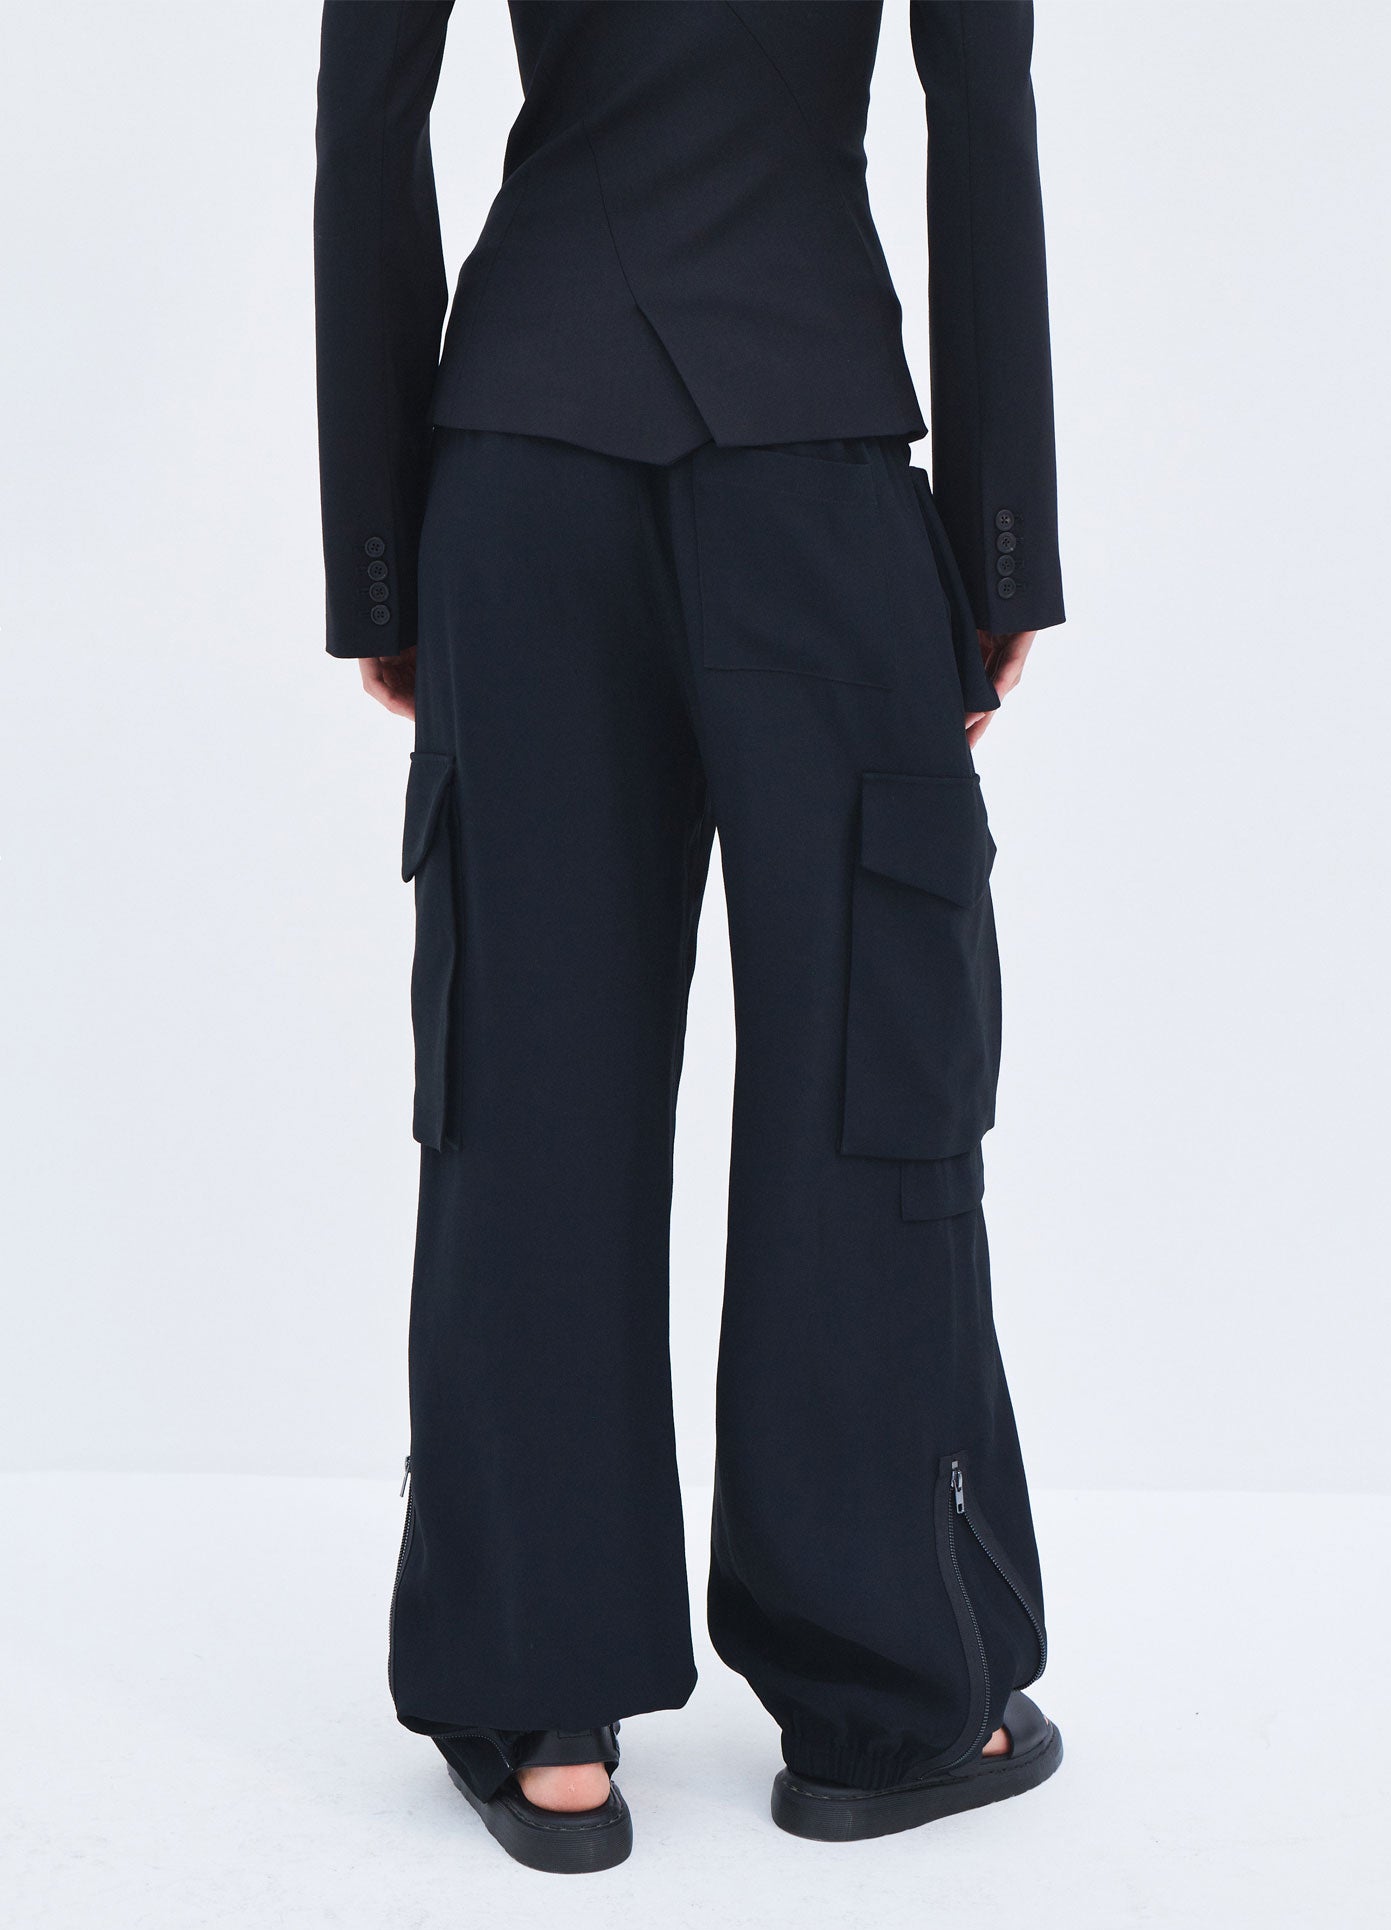 MONSE Spring 2024 Double Waistband Cargo Pants in Black on model back bottoms view